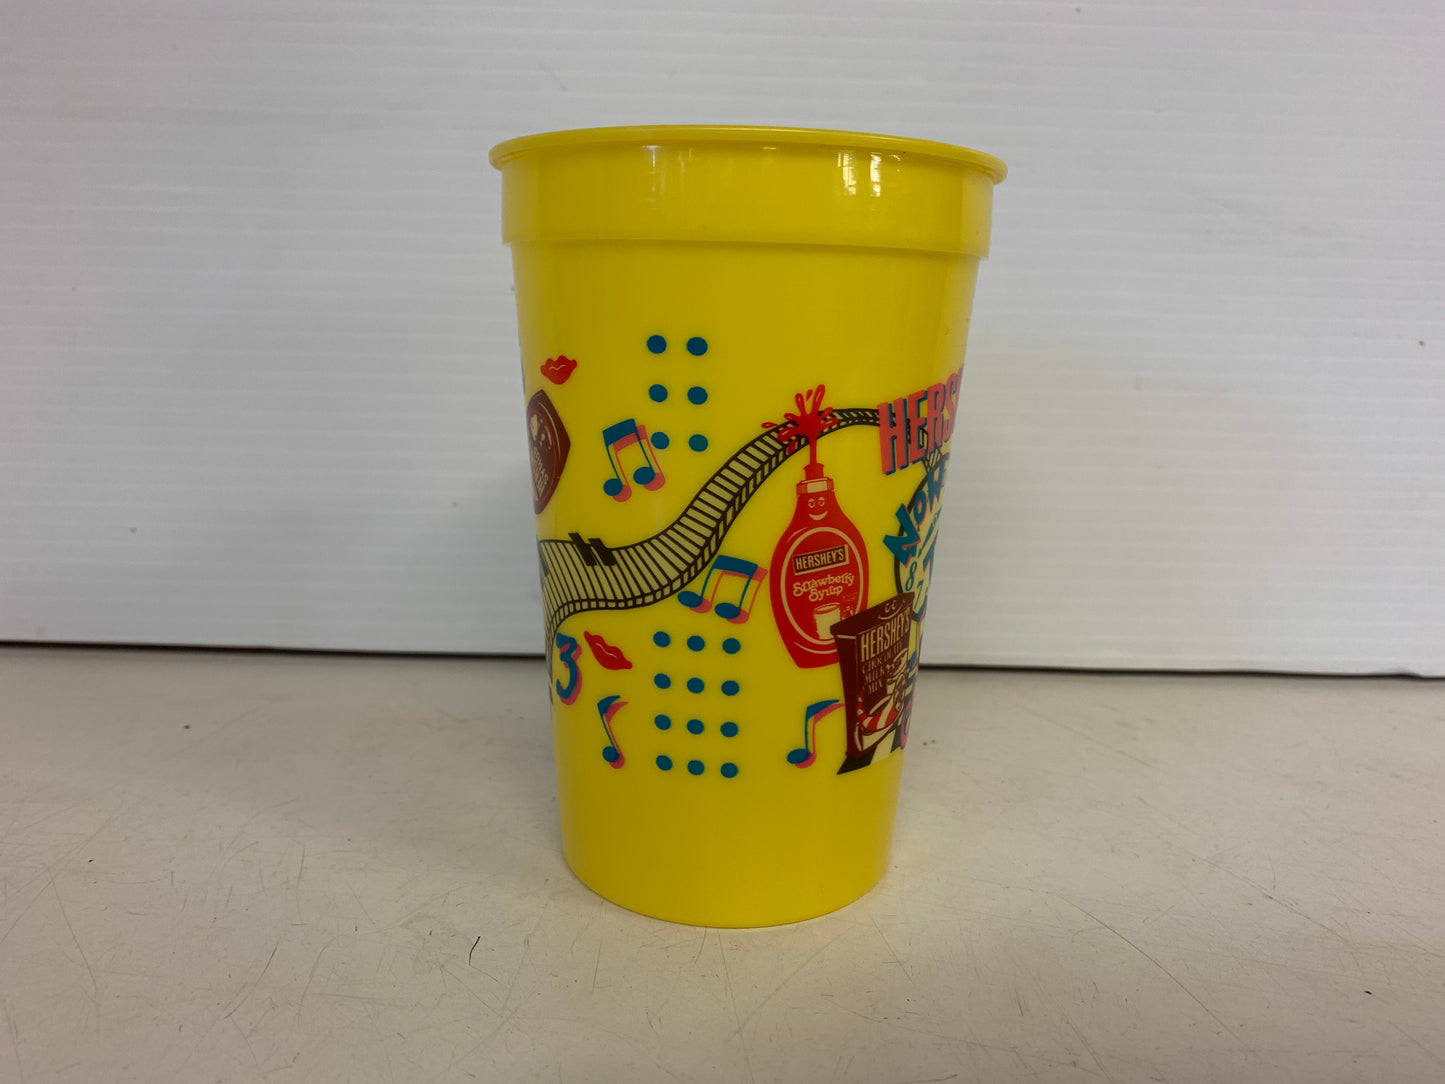 Vintage 1992 Hershey's Chocolate Syrup "Now it's Time 4 Chocolate" Plastic Yellow Drink Cup